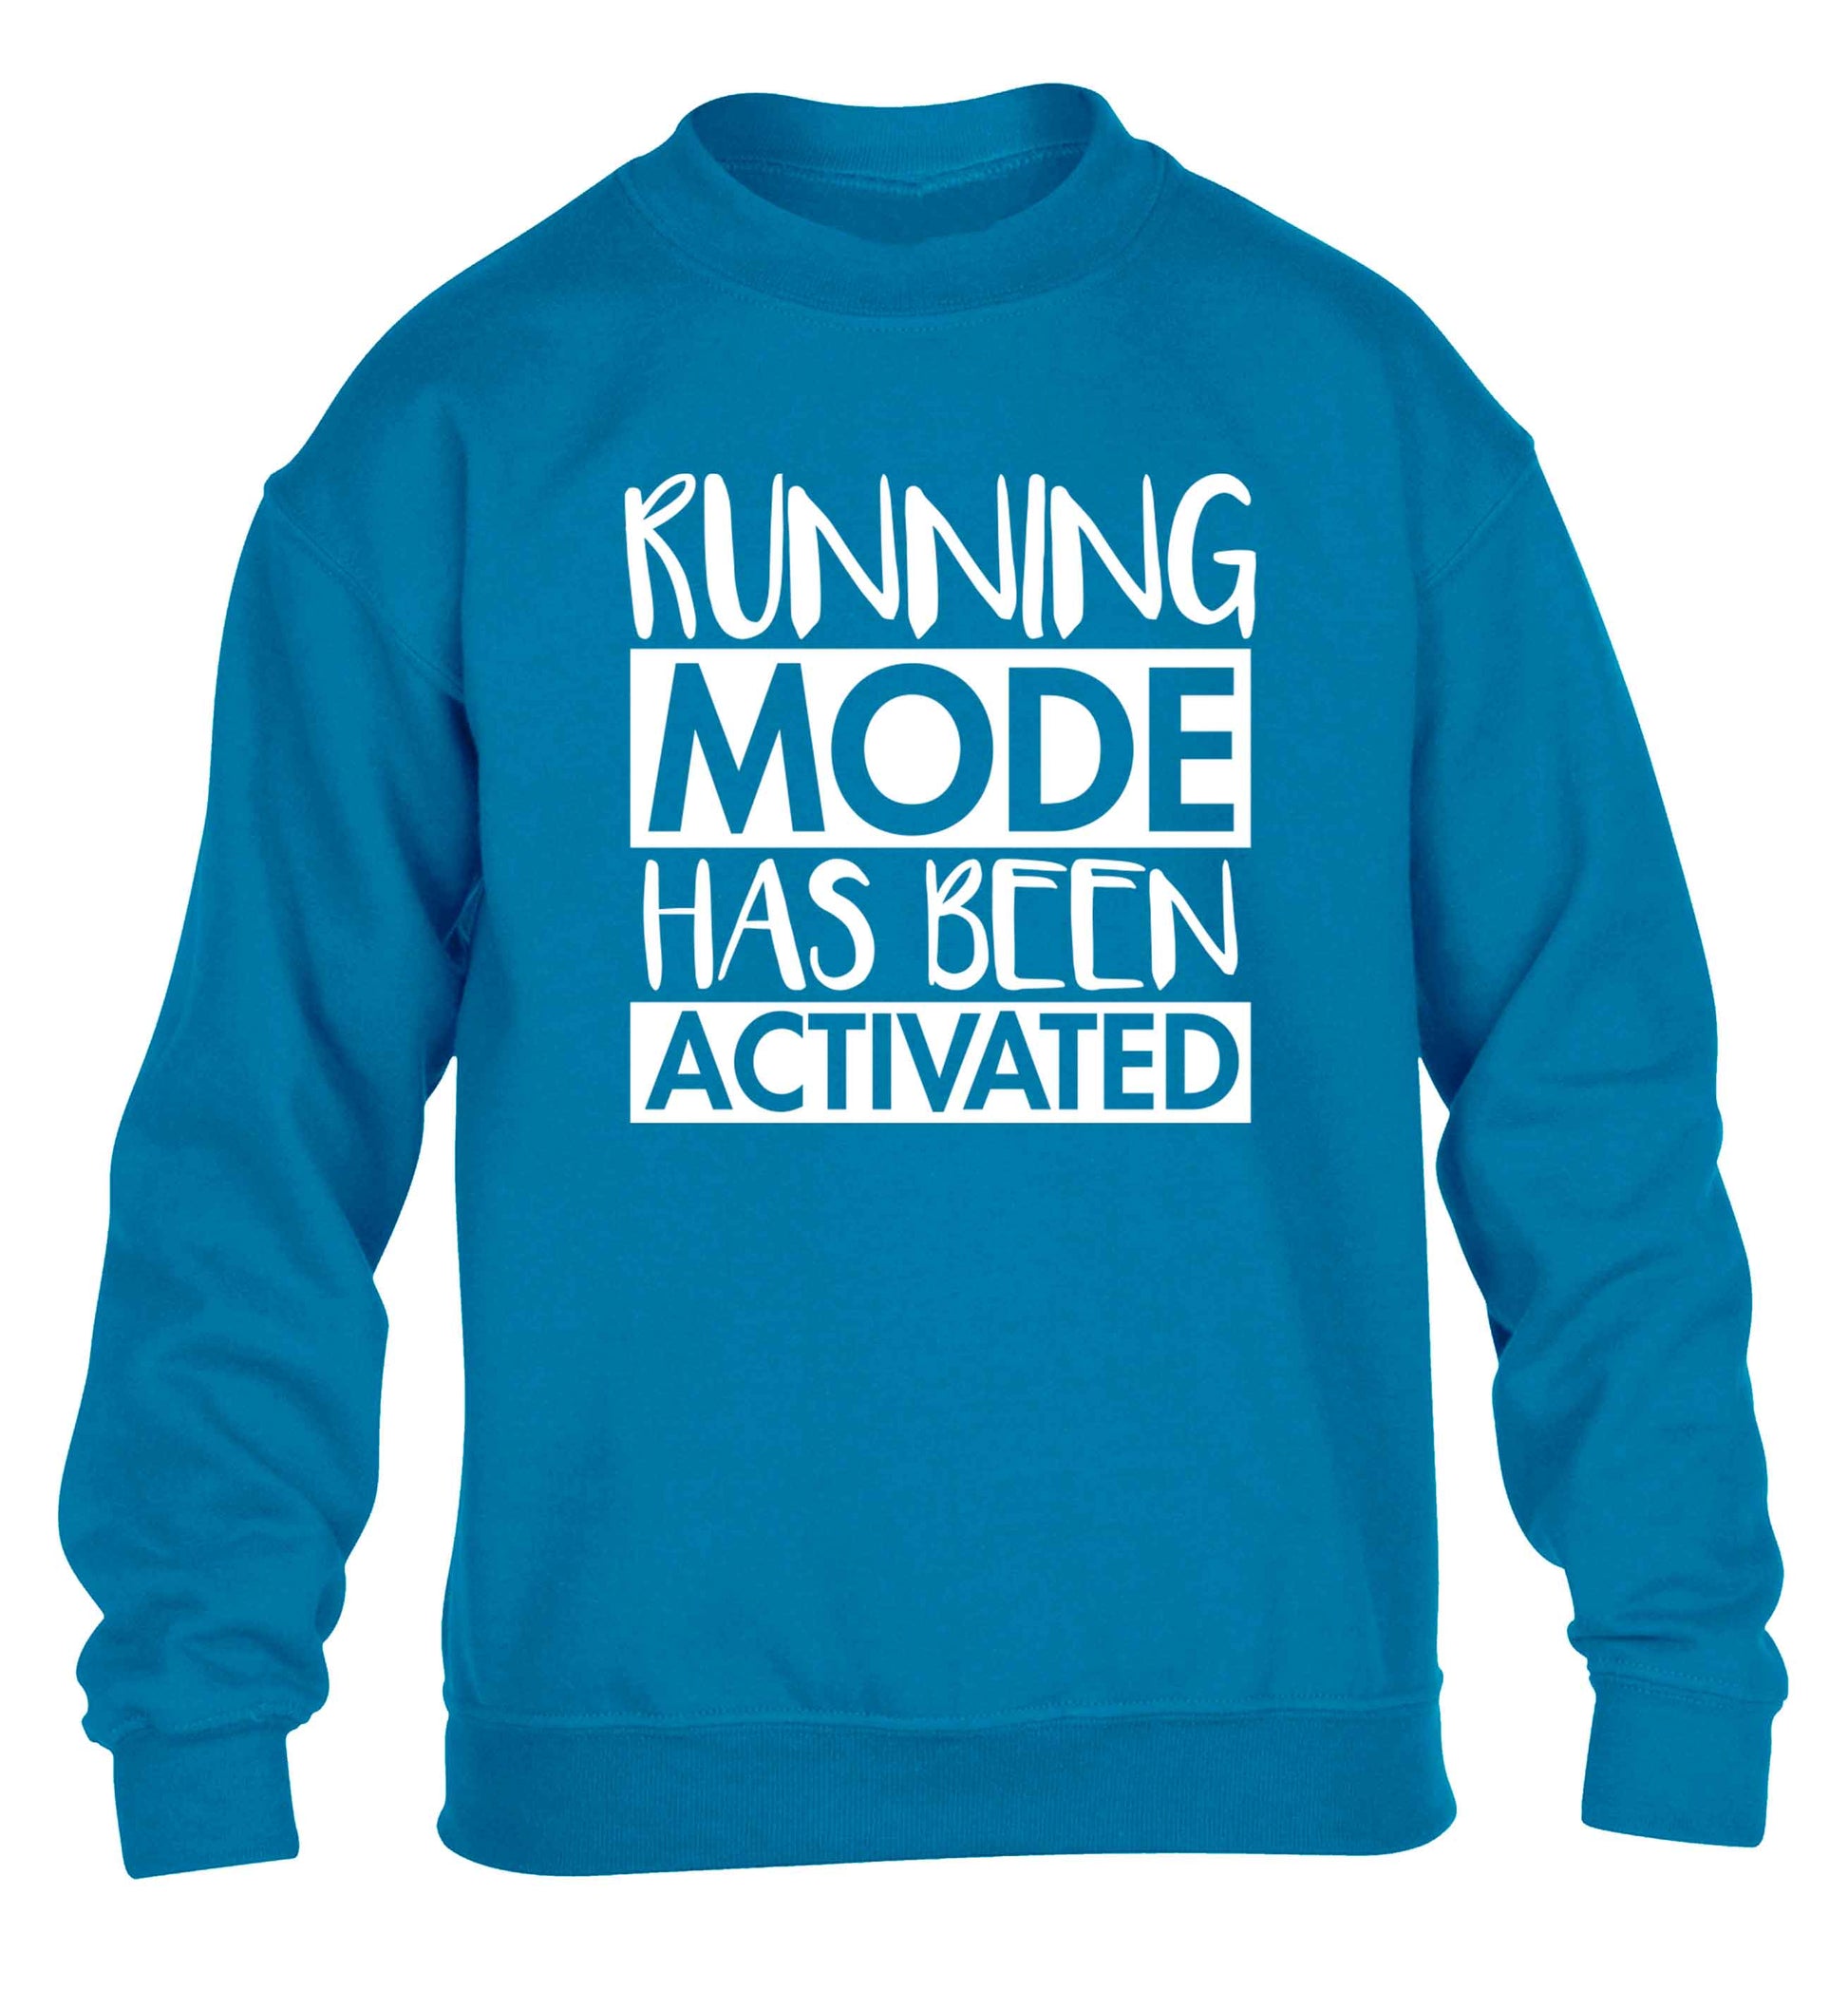 Running mode has been activated children's blue sweater 12-13 Years